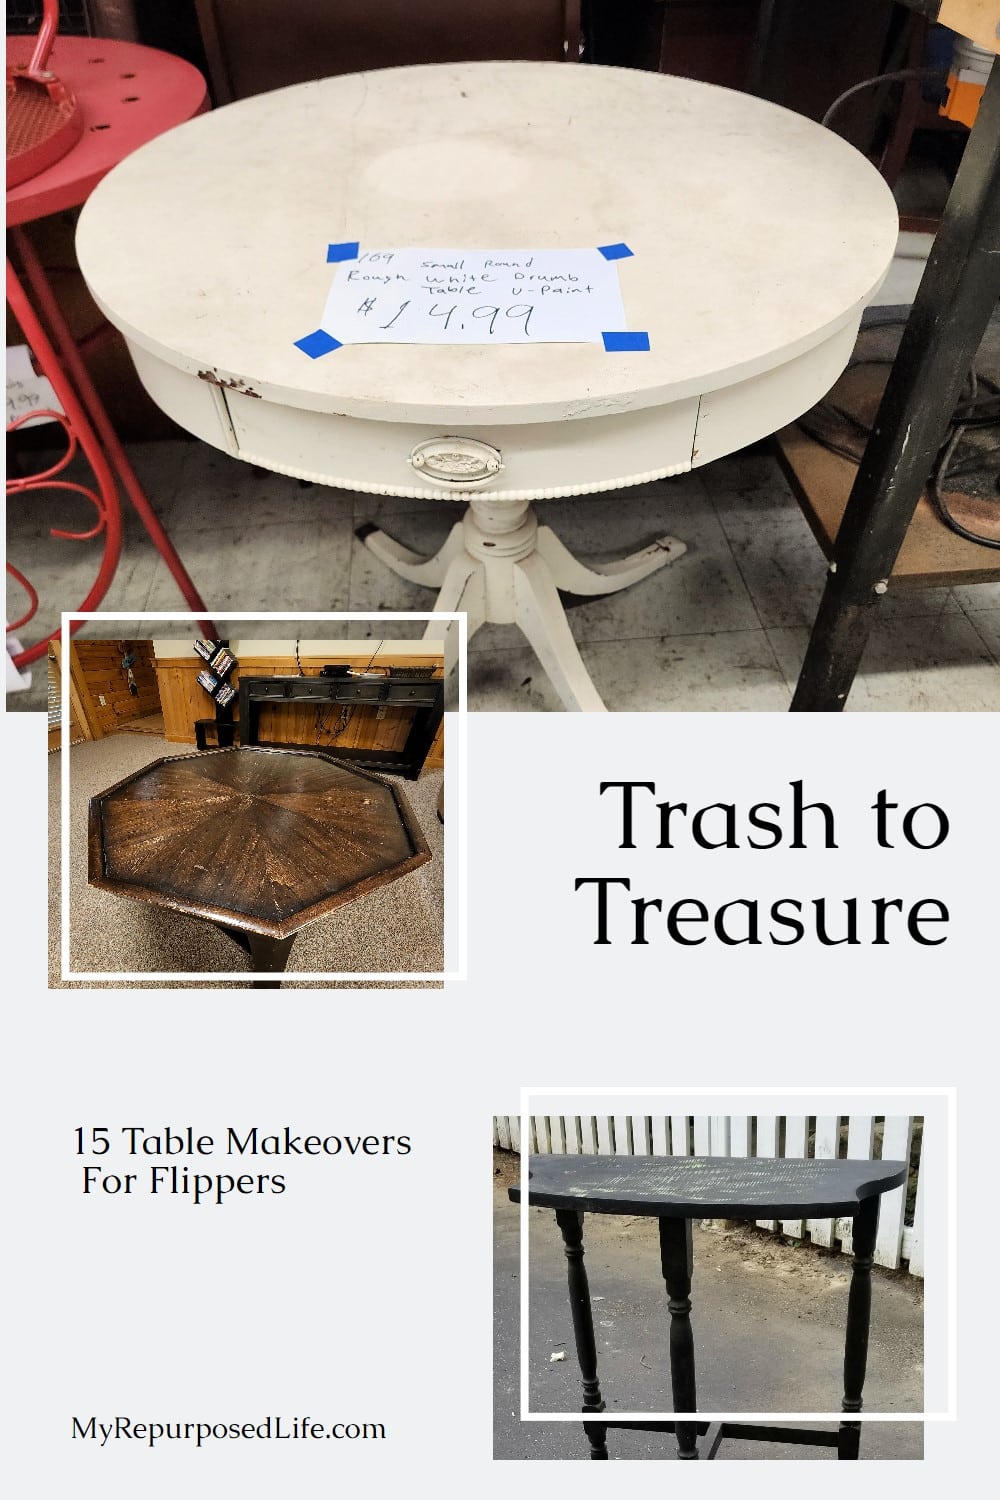 Trash to treasure furniture flipping. Fifteen easy table makeovers to inspire you even on the ugliest furniture you've ever seen. Say Yes! via @repurposedlife